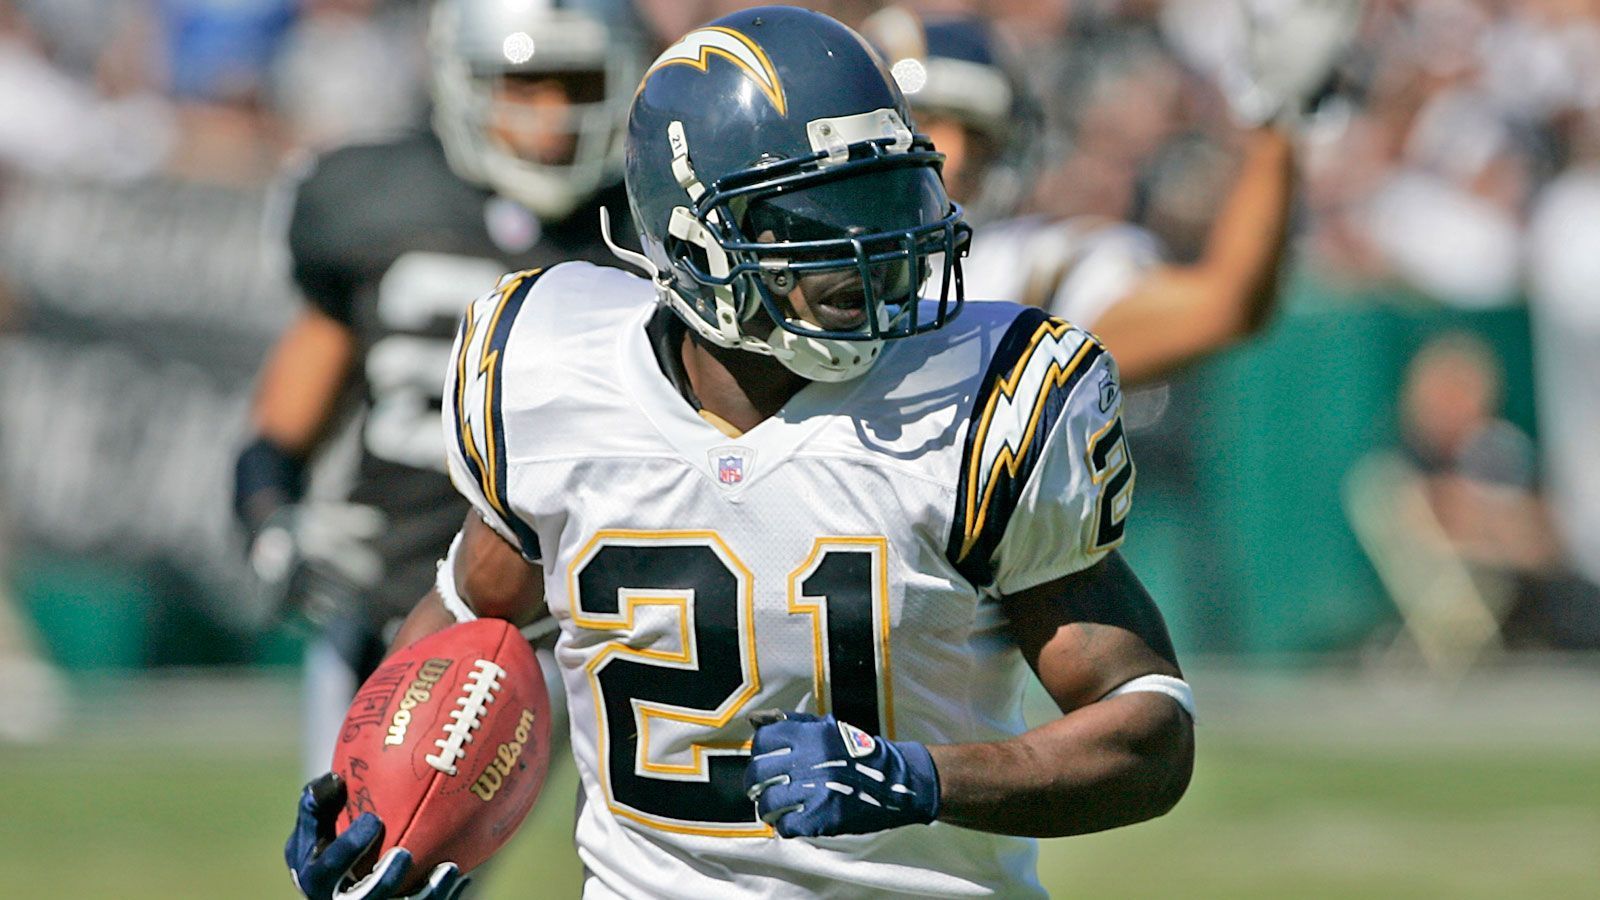 
                <strong>Los Angeles Chargers</strong><br>
                14 Dan Fouts, 19 Lance Alworth, 21 LaDainian Tomlinson (Foto) und 55 Junior Seau.
              